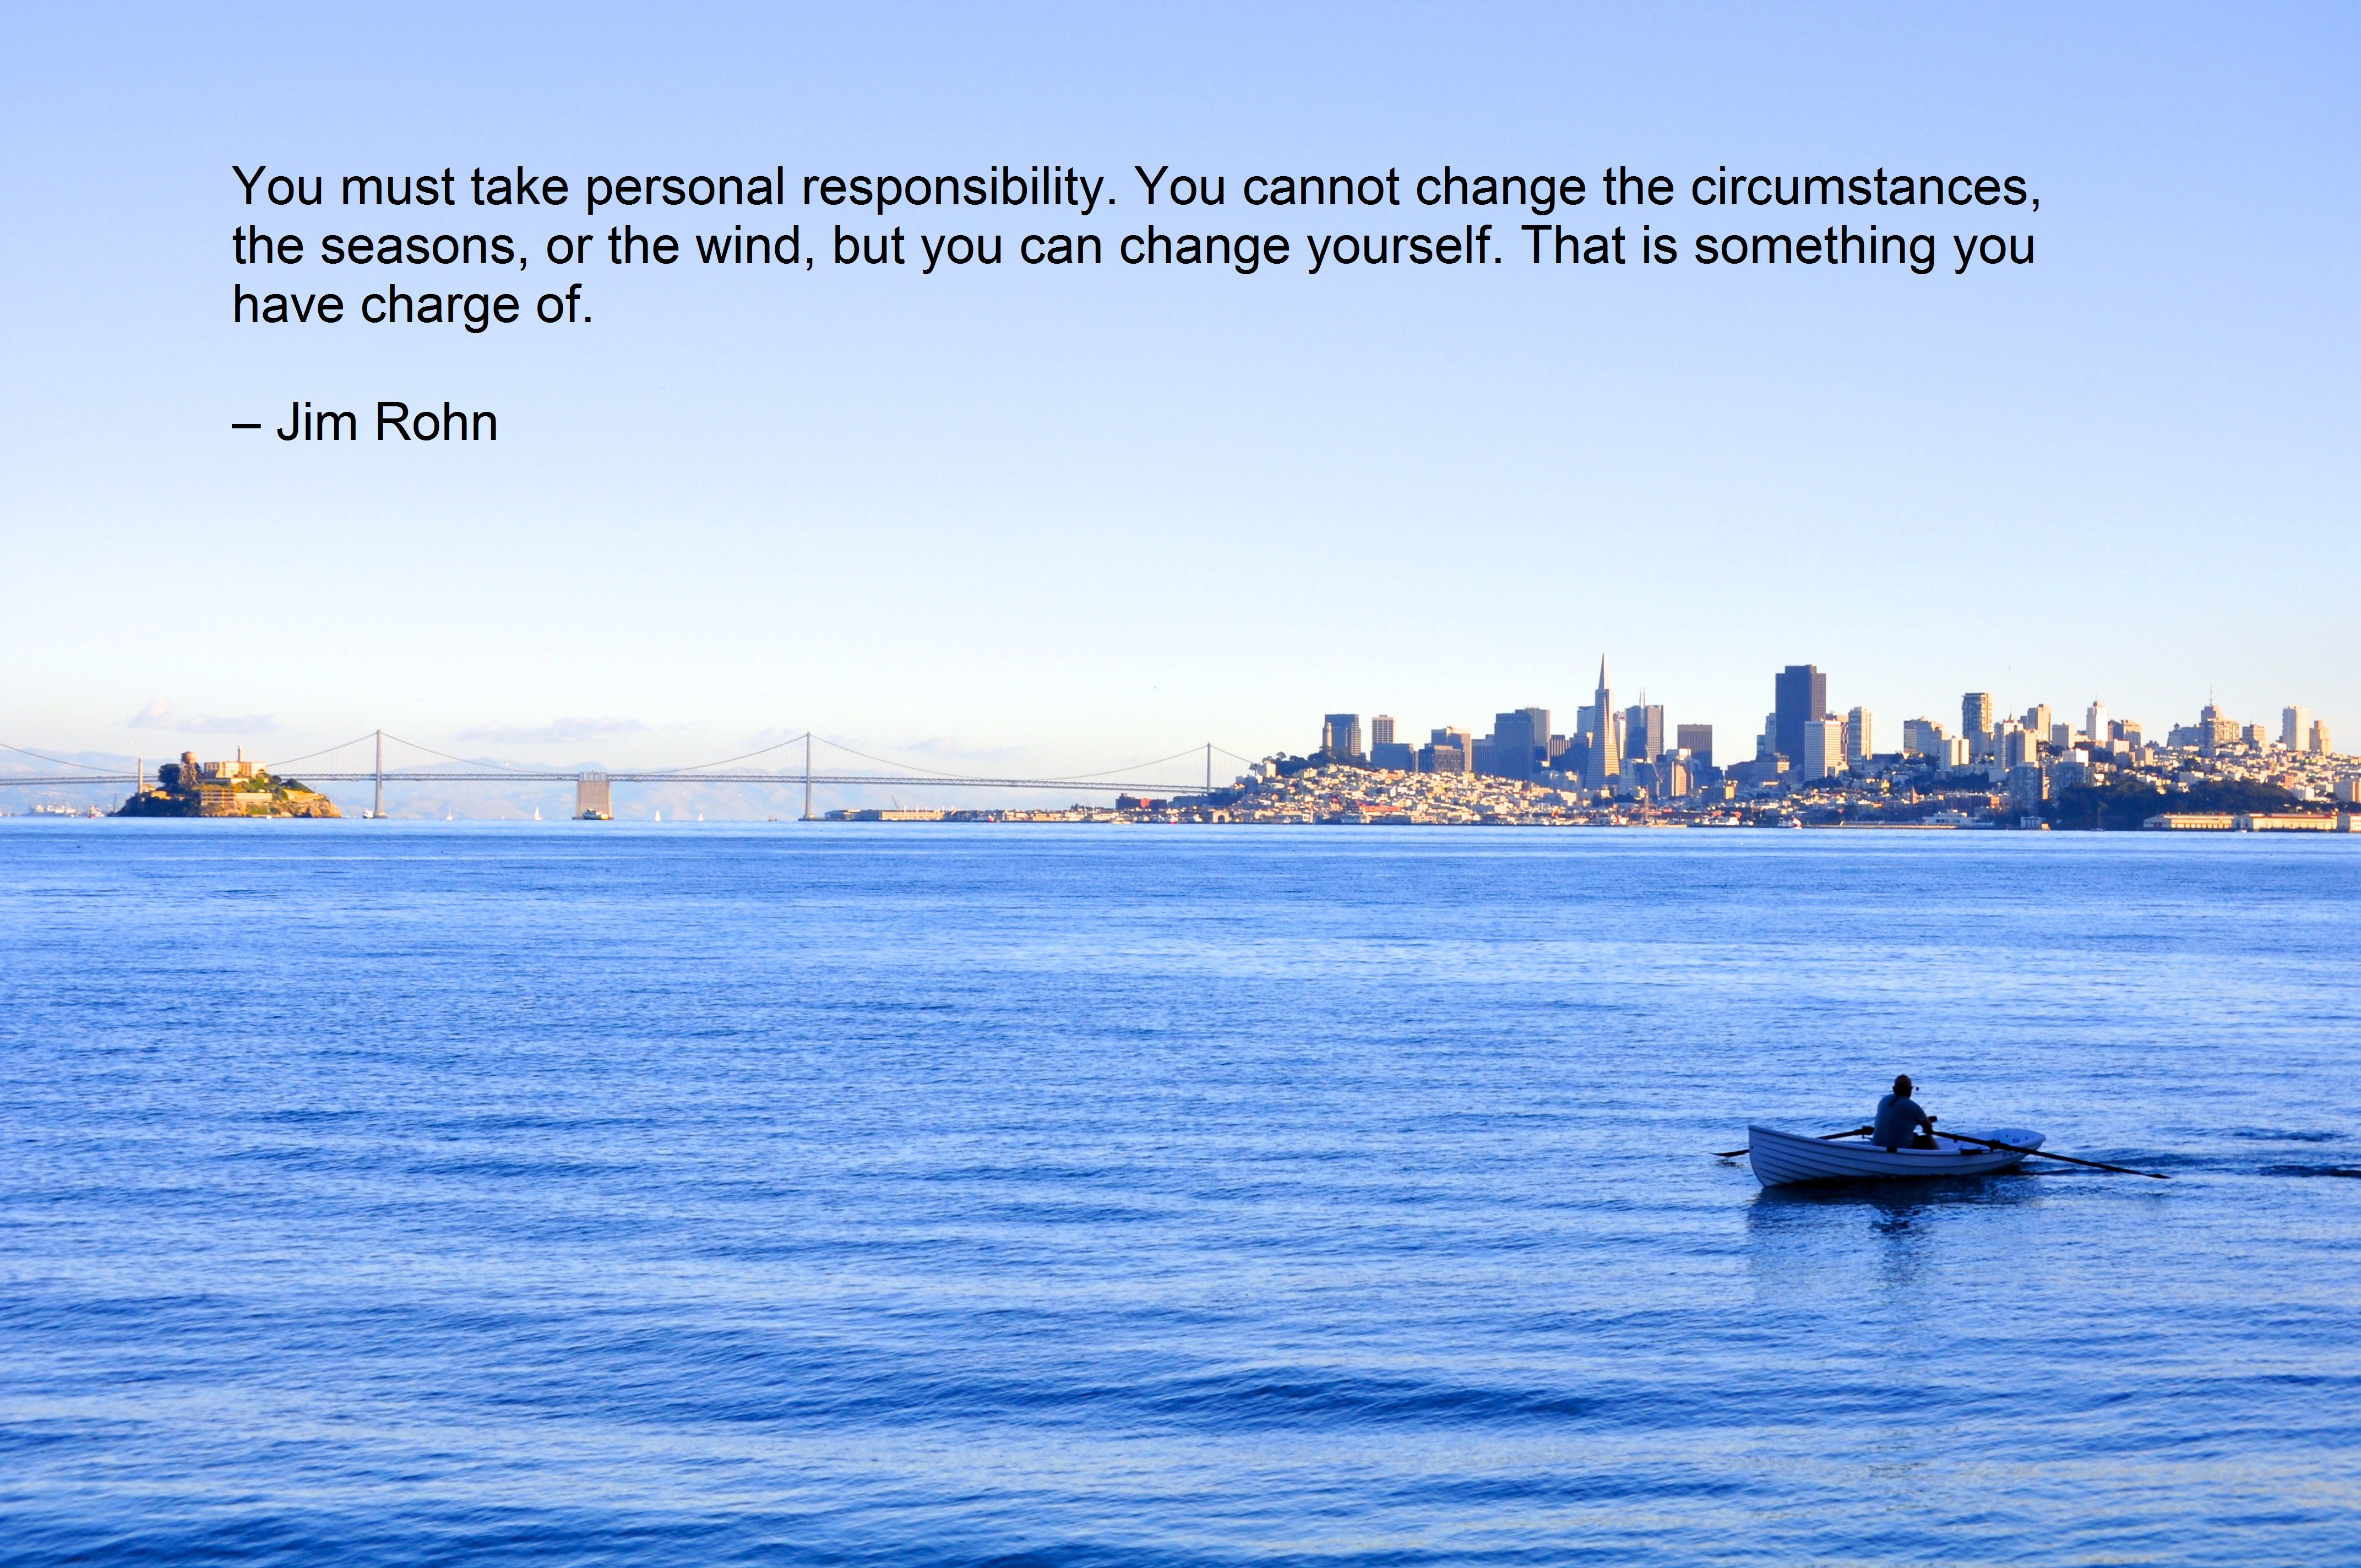 You must take personal responsibility. You cannot change the circumstances, the seasons, or the wind, but you can change yourself. That is something you have charge of. – Jim Rohn